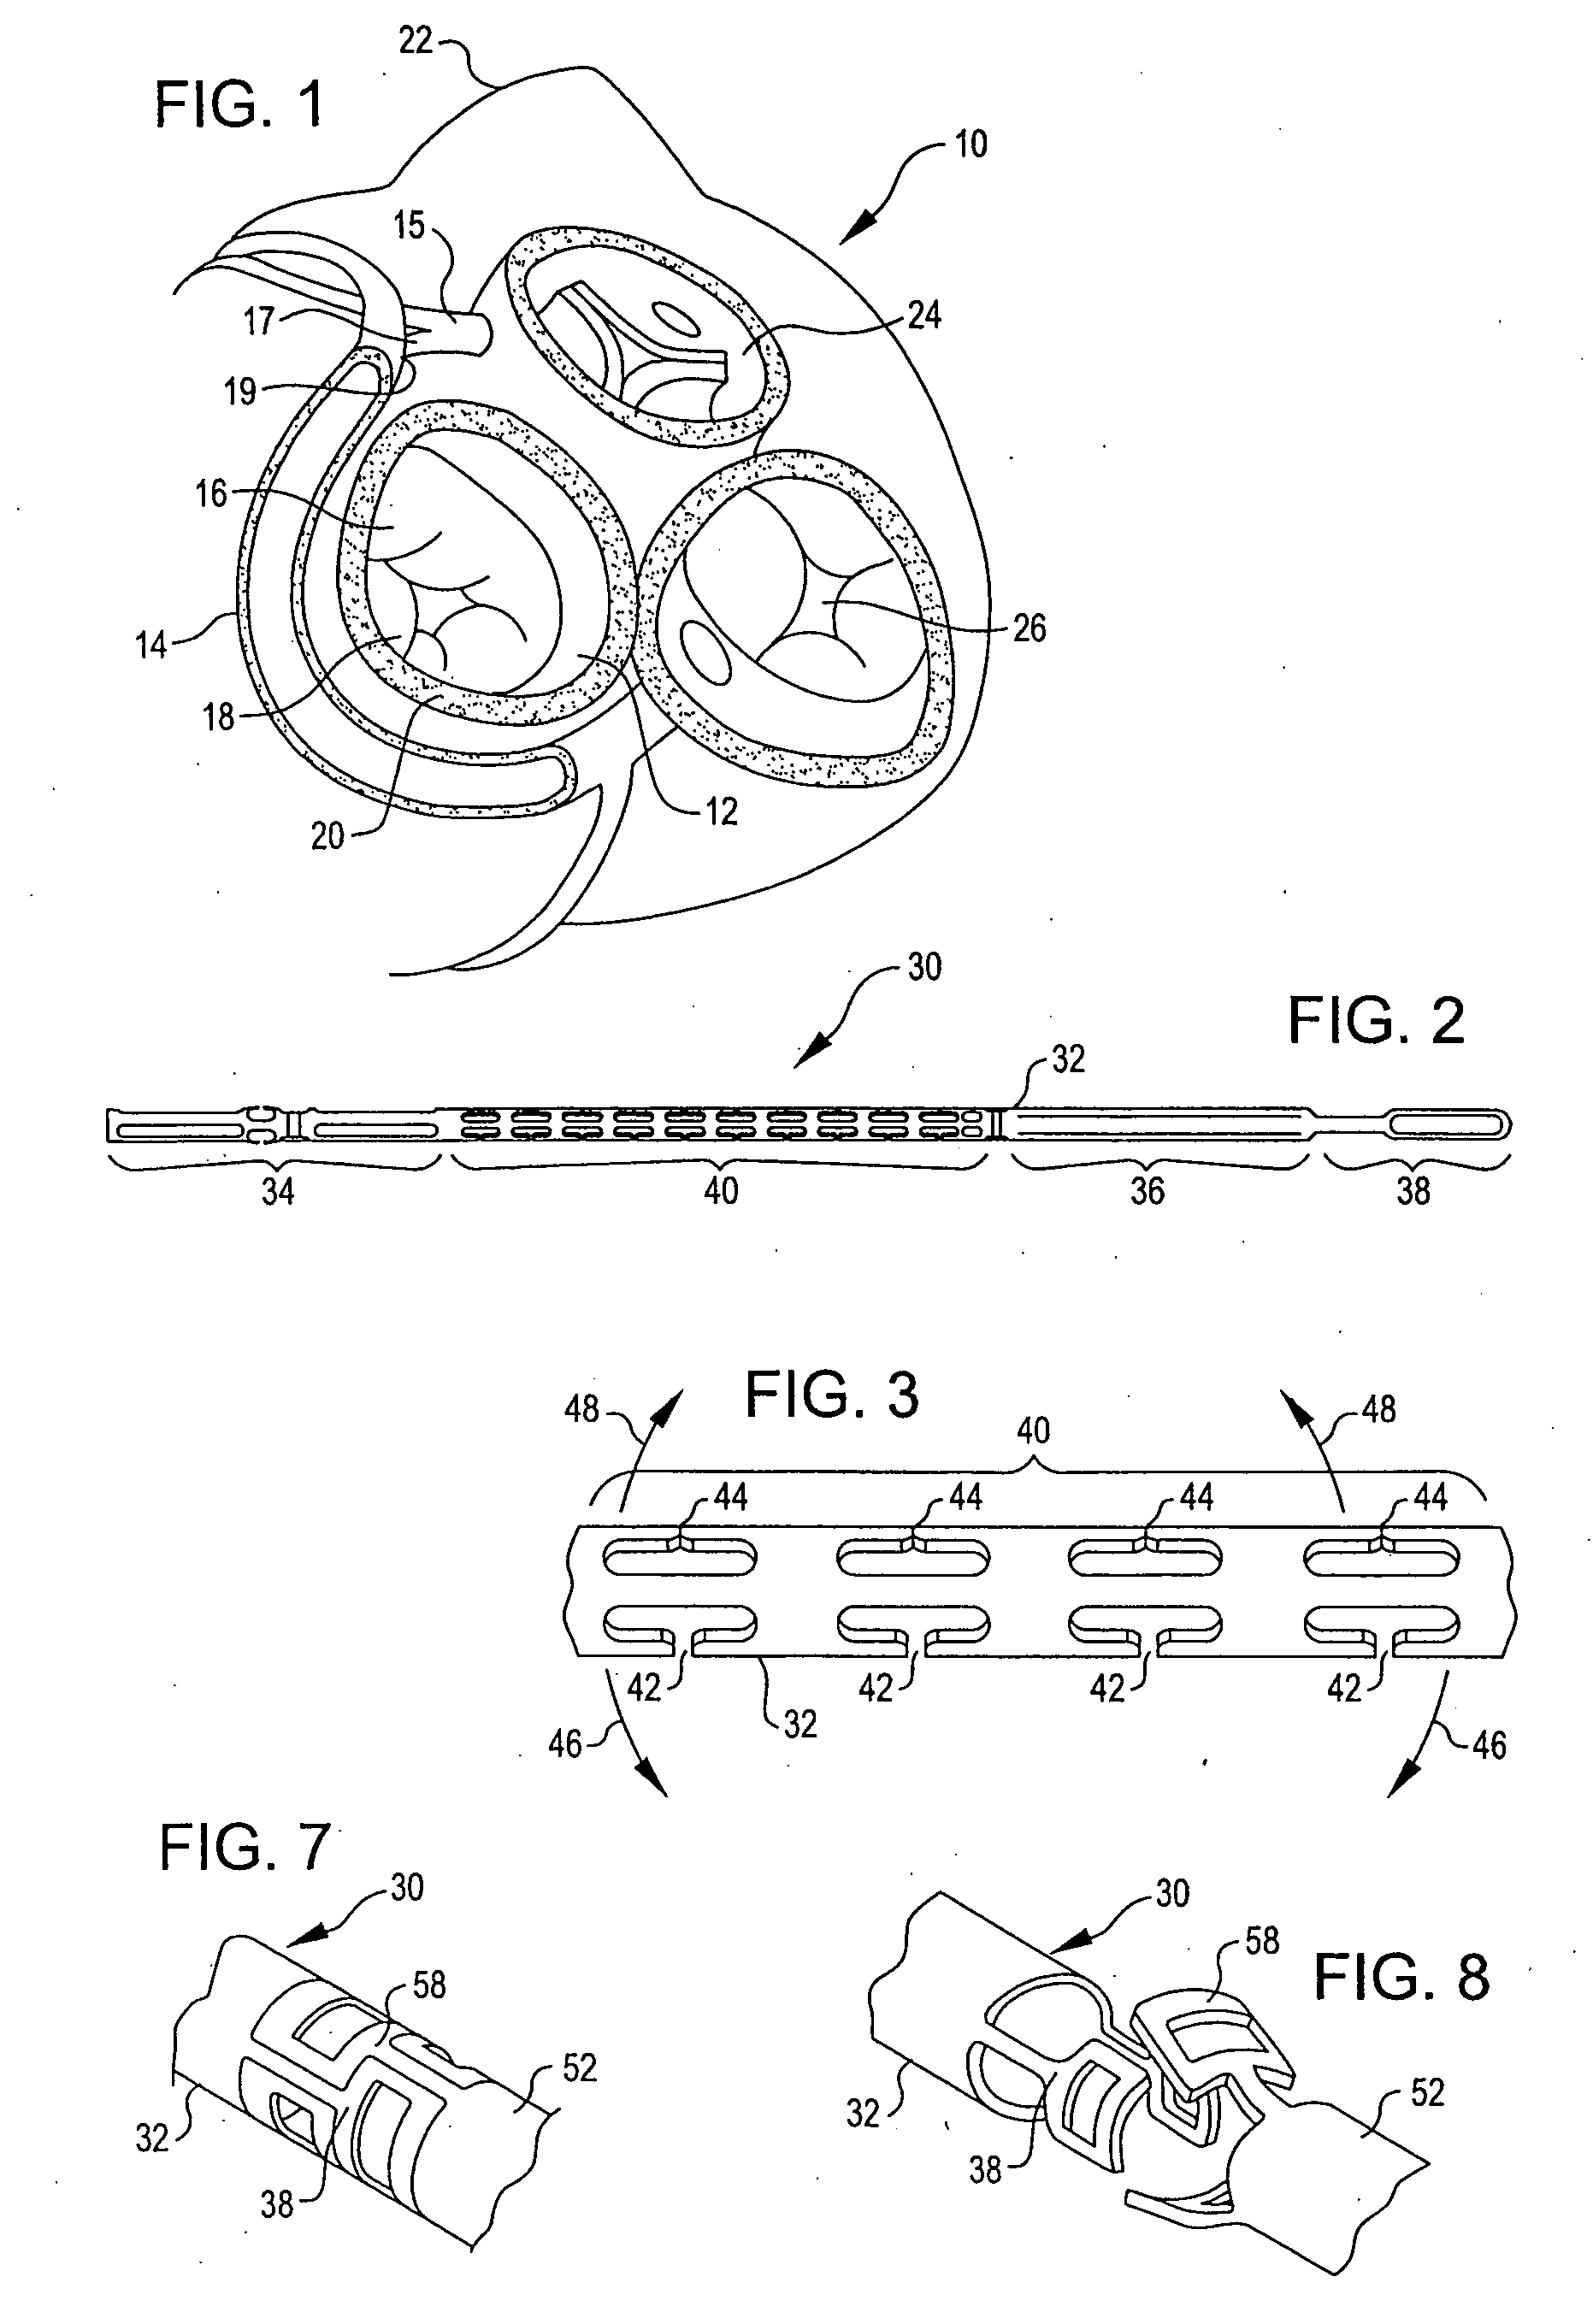 Device, assembly and method for mitral valve repair